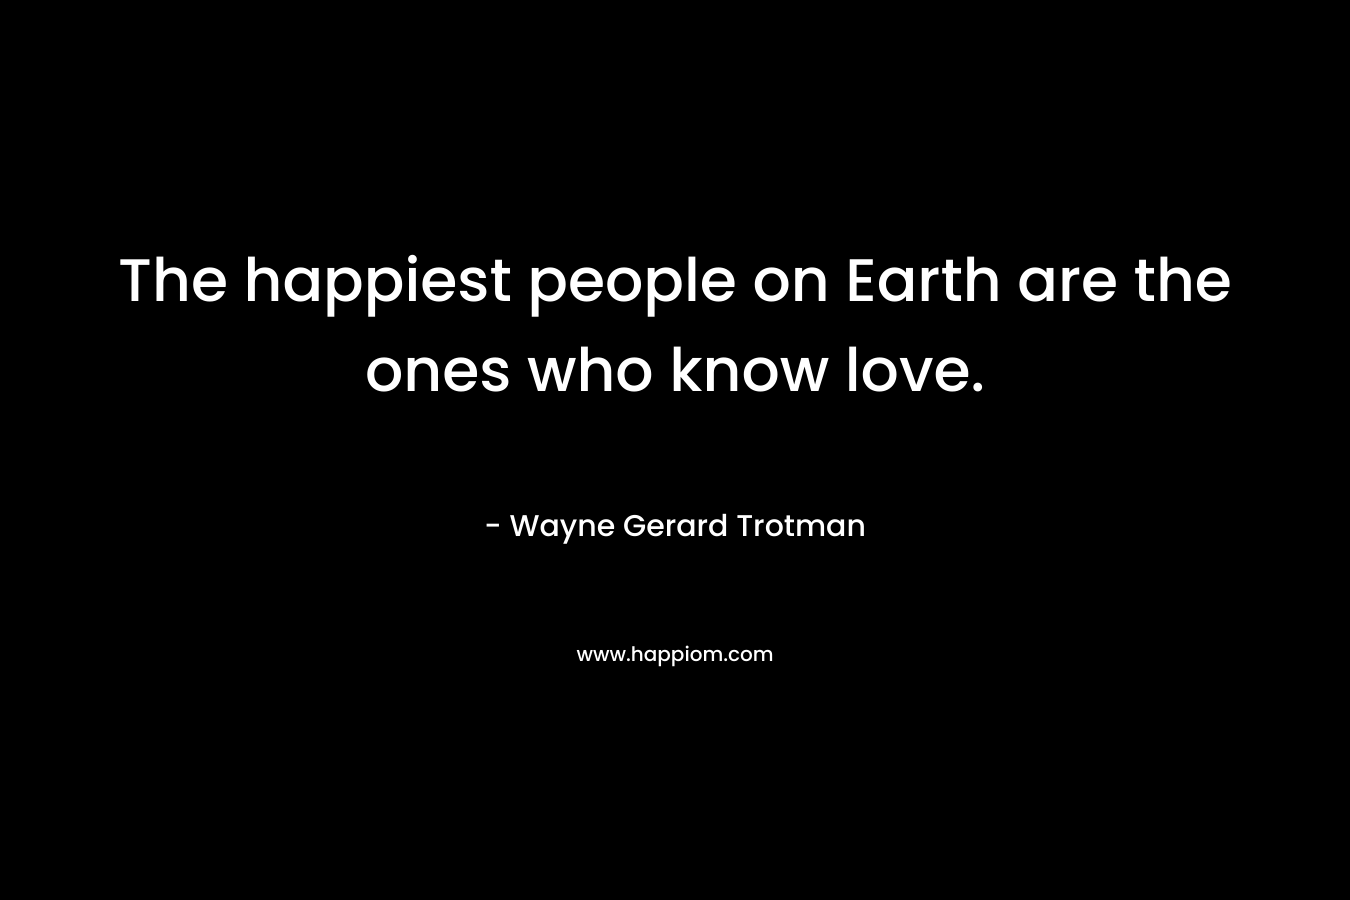 The happiest people on Earth are the ones who know love.